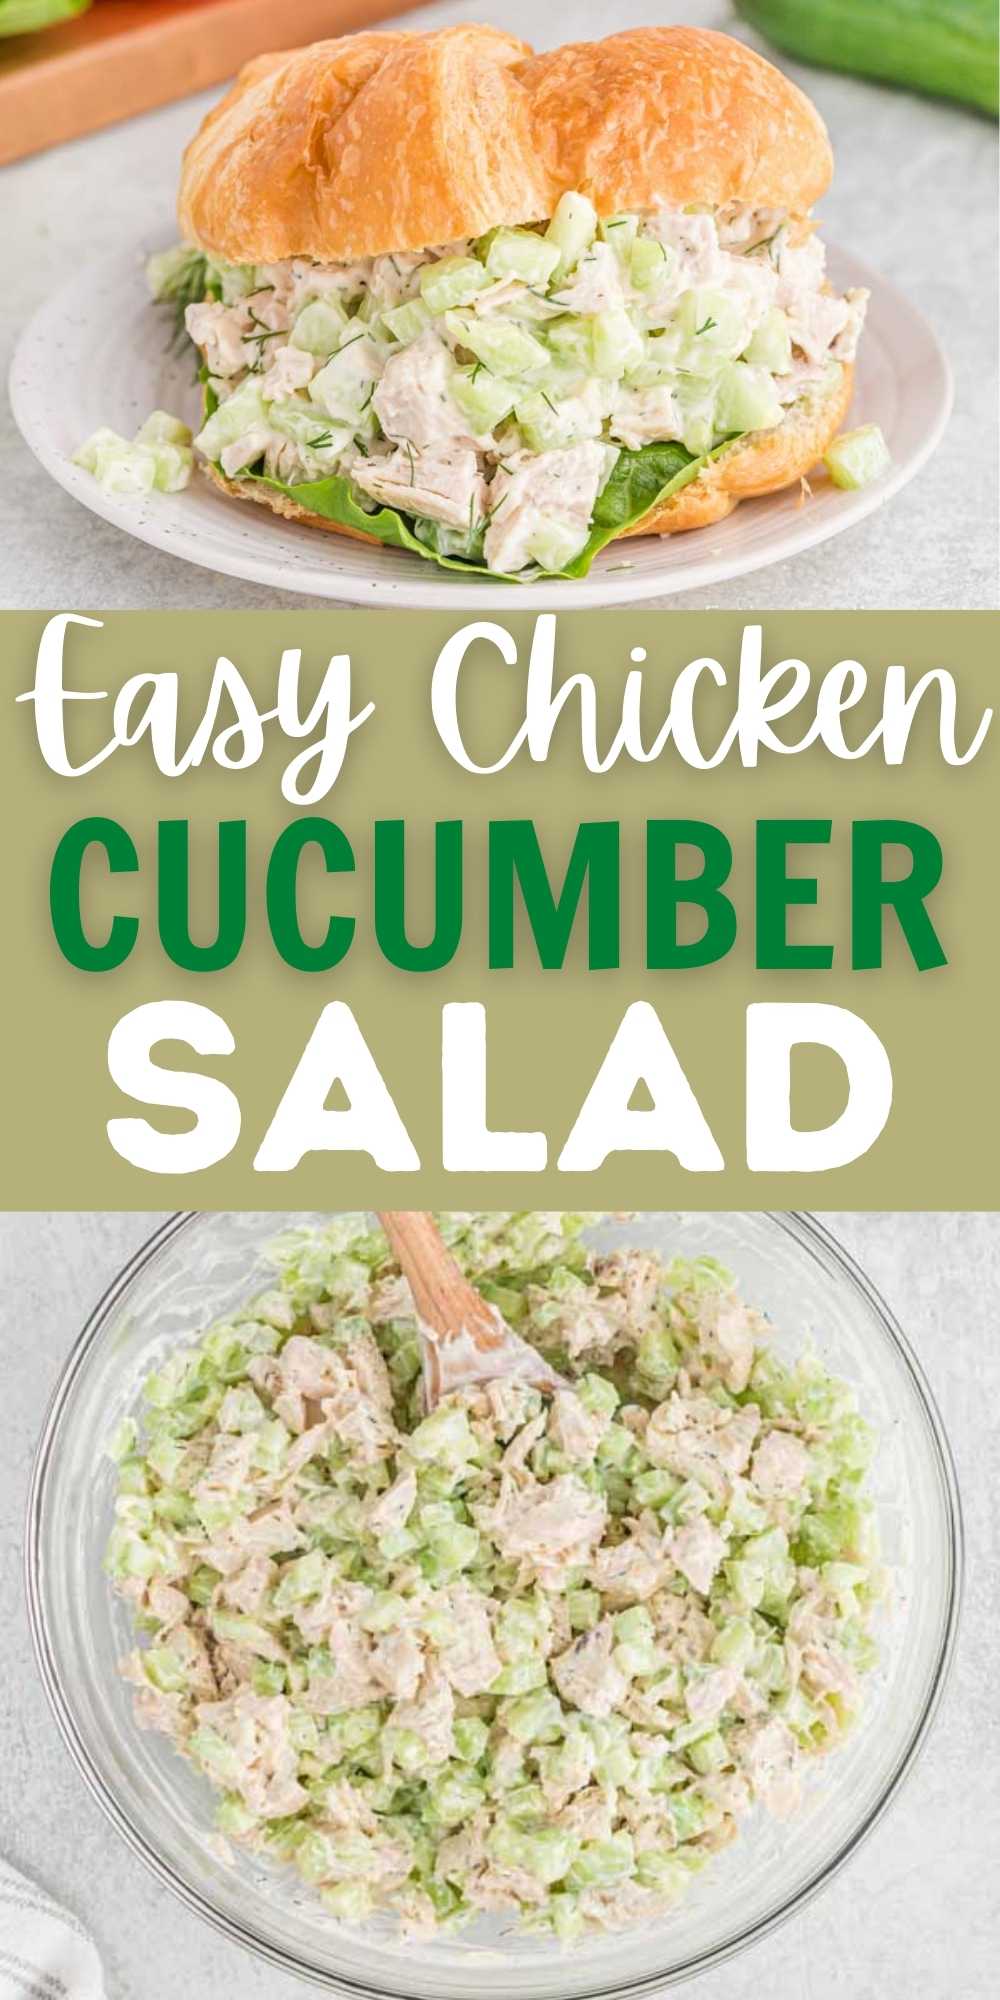 You can make this delicious Cucumber Chicken Salad Sandwich Recipe in just 10 minutes. It is so tasty and easy meal idea for busy schedules. This Chicken Cucumber Salad Sandwich recipe is aa fun twist on a classic recipe. #eatingonadime #chickensaladrecipes #sandwichrecipes #chickenrecipes 